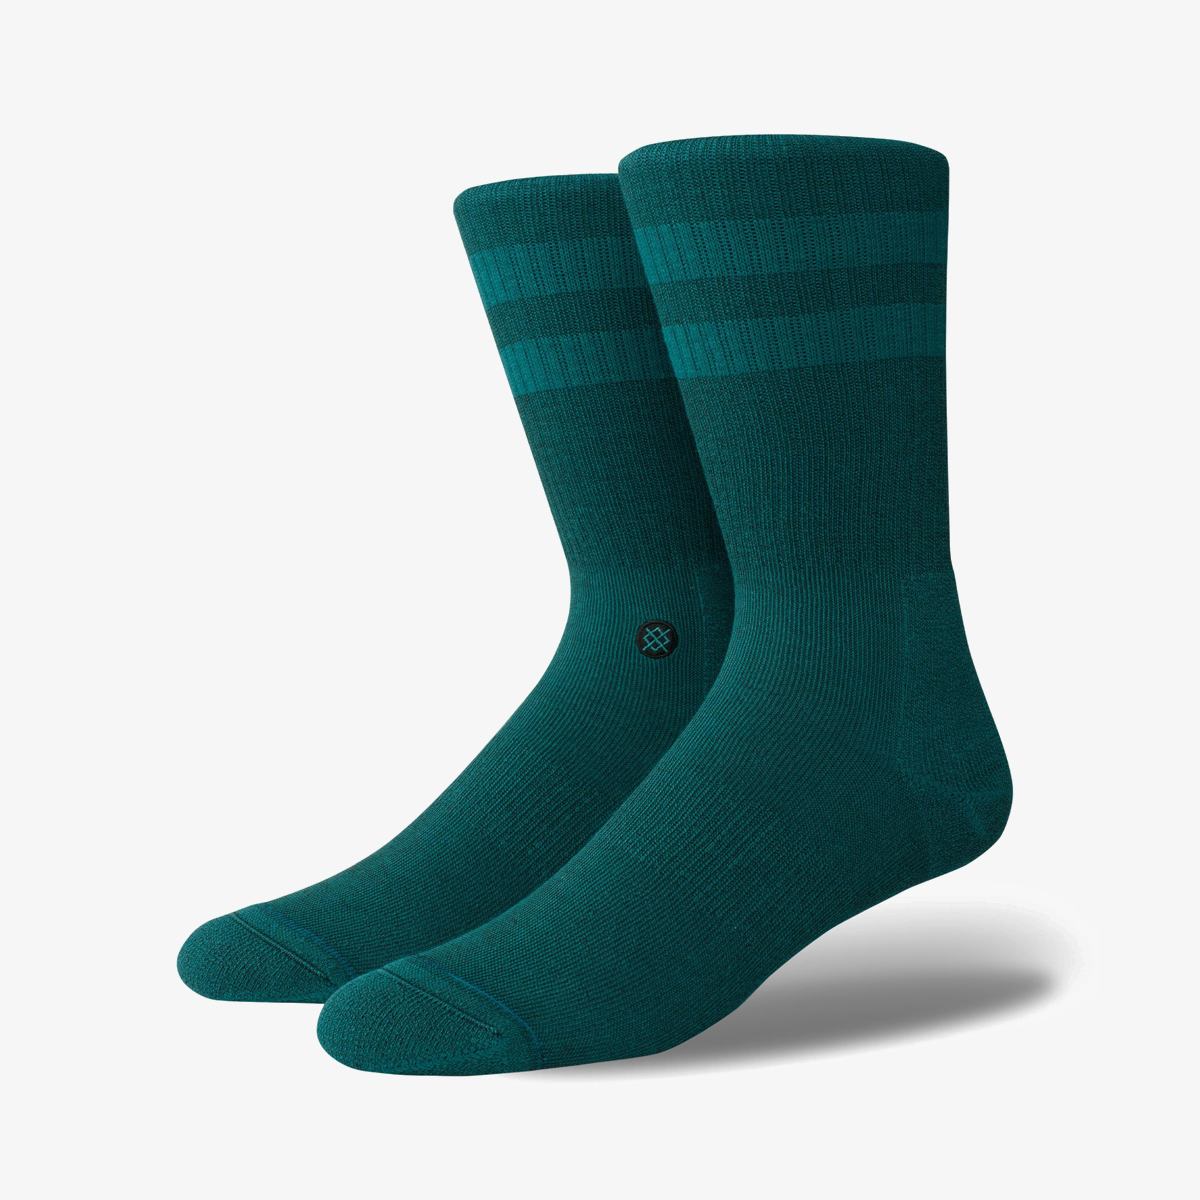 Носки Stance JOVEN TEAL M